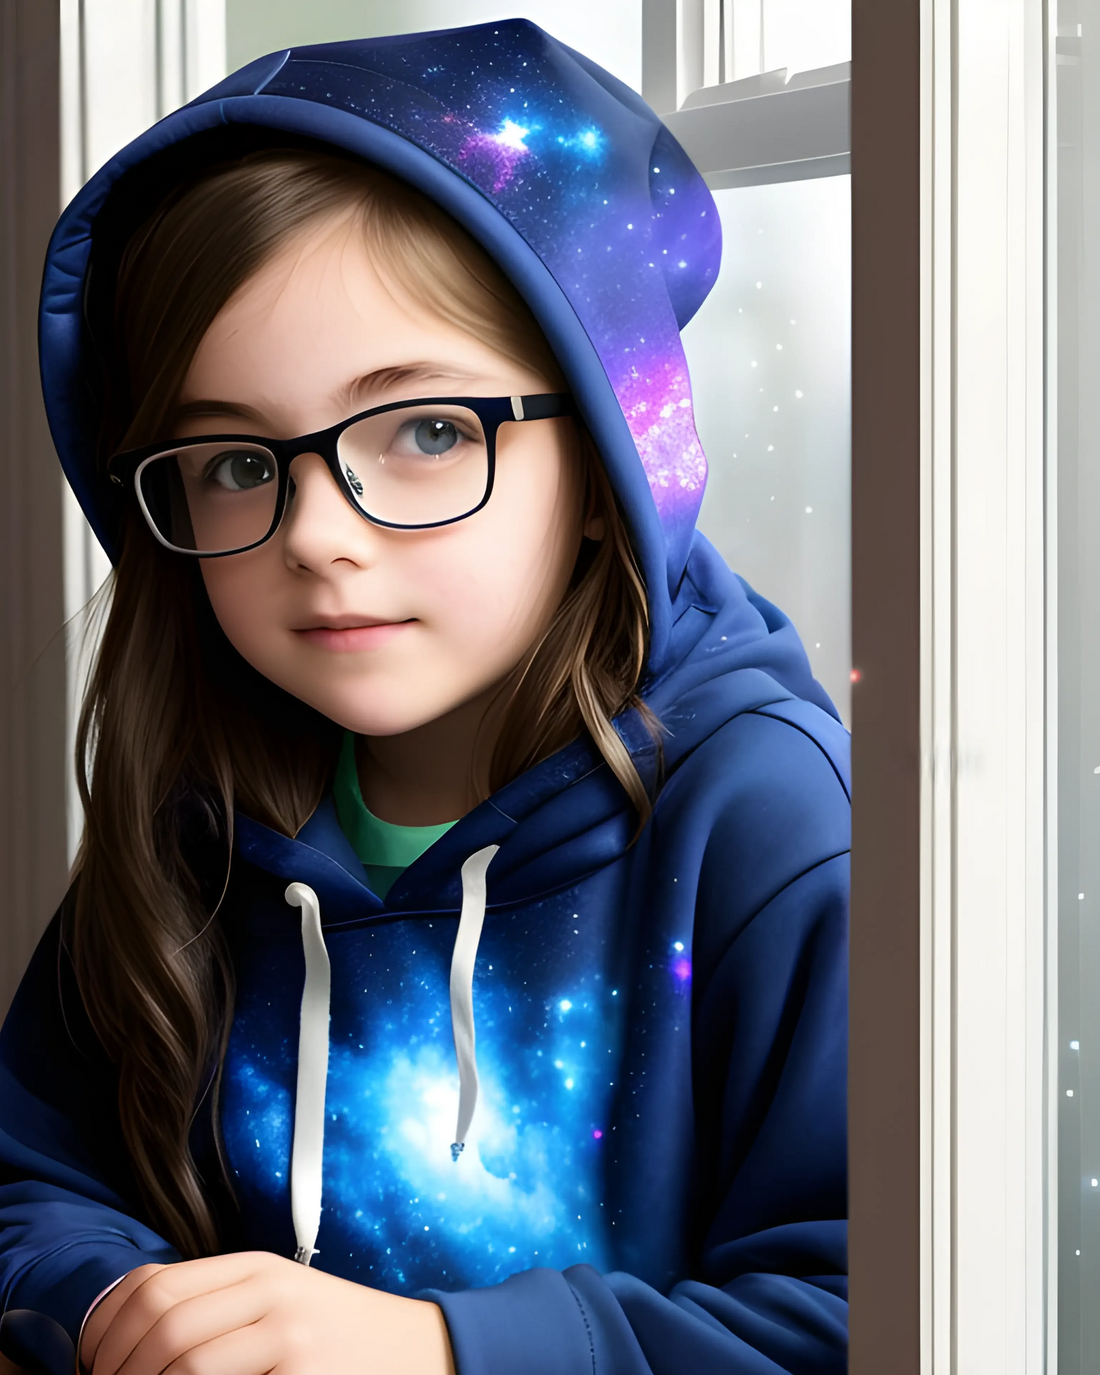 The Nebula Palace - Young girl with glasses wearing nebula themed hoodie while looking outside of a window. Spirituality, cosmic energy, nebulas.